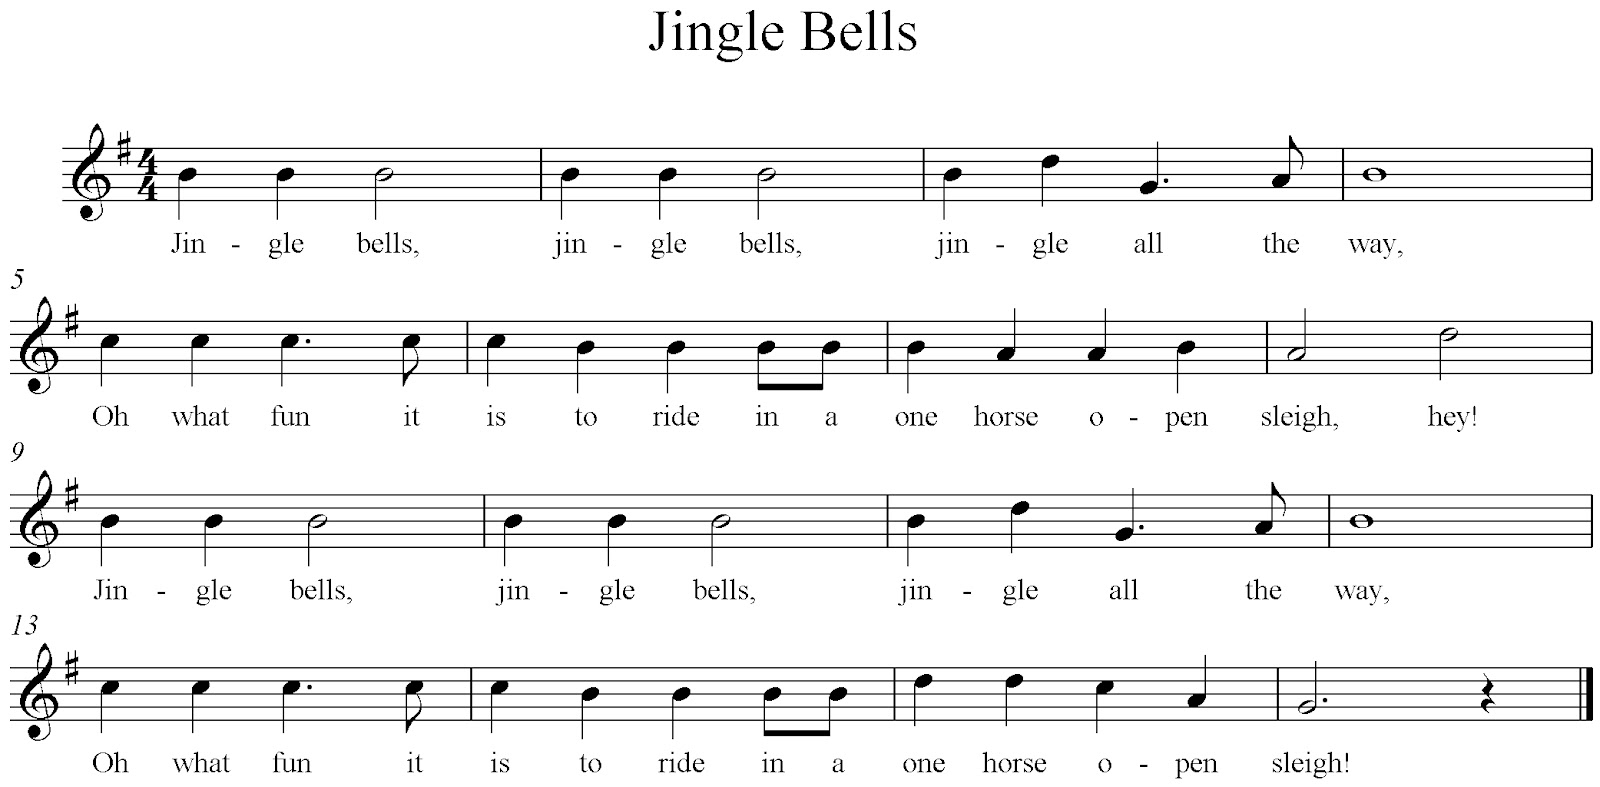 easy jingle bells sheet music for recorder - DriverLayer Search Engine